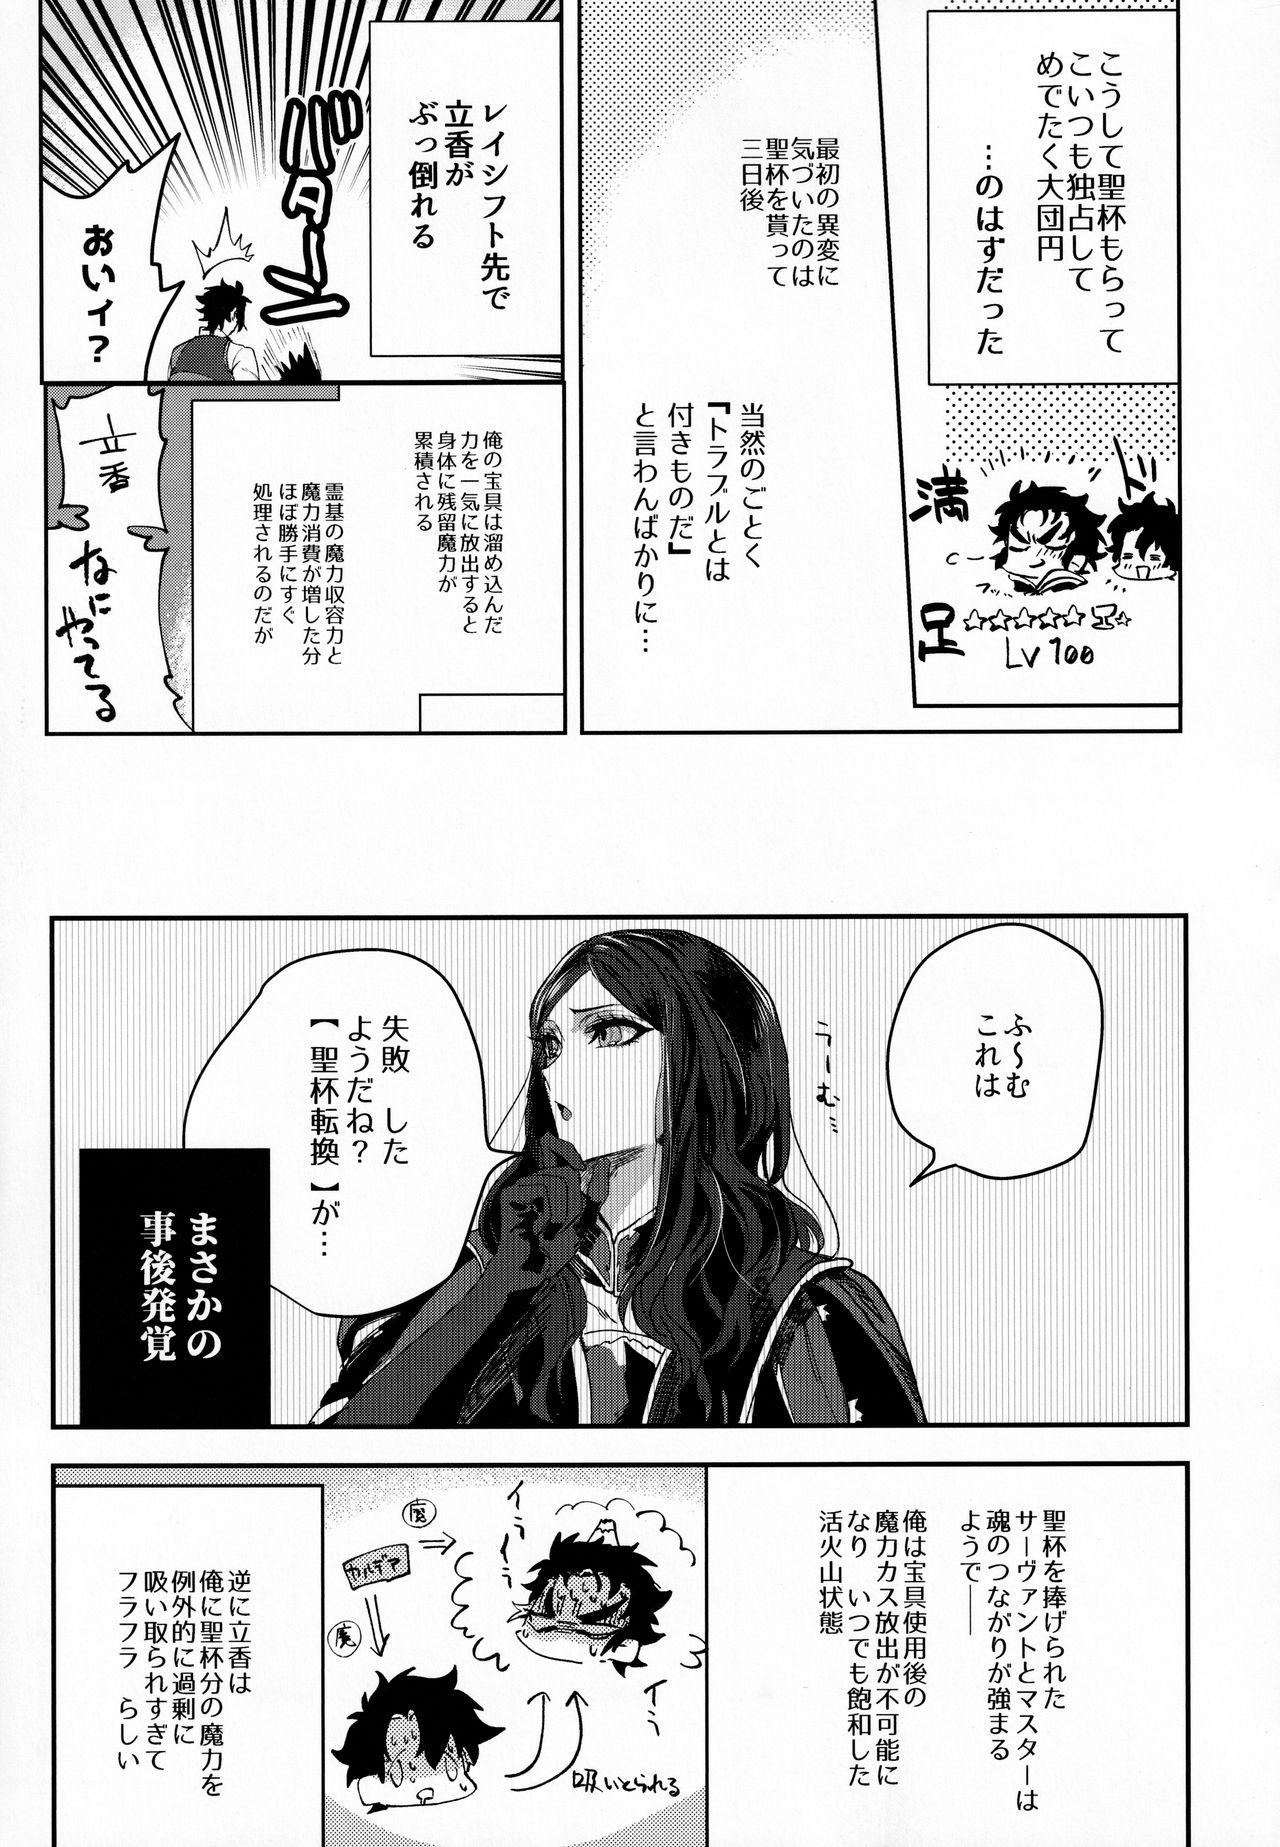 Massages 耽溺と熱 - Fate grand order Atm - Page 12